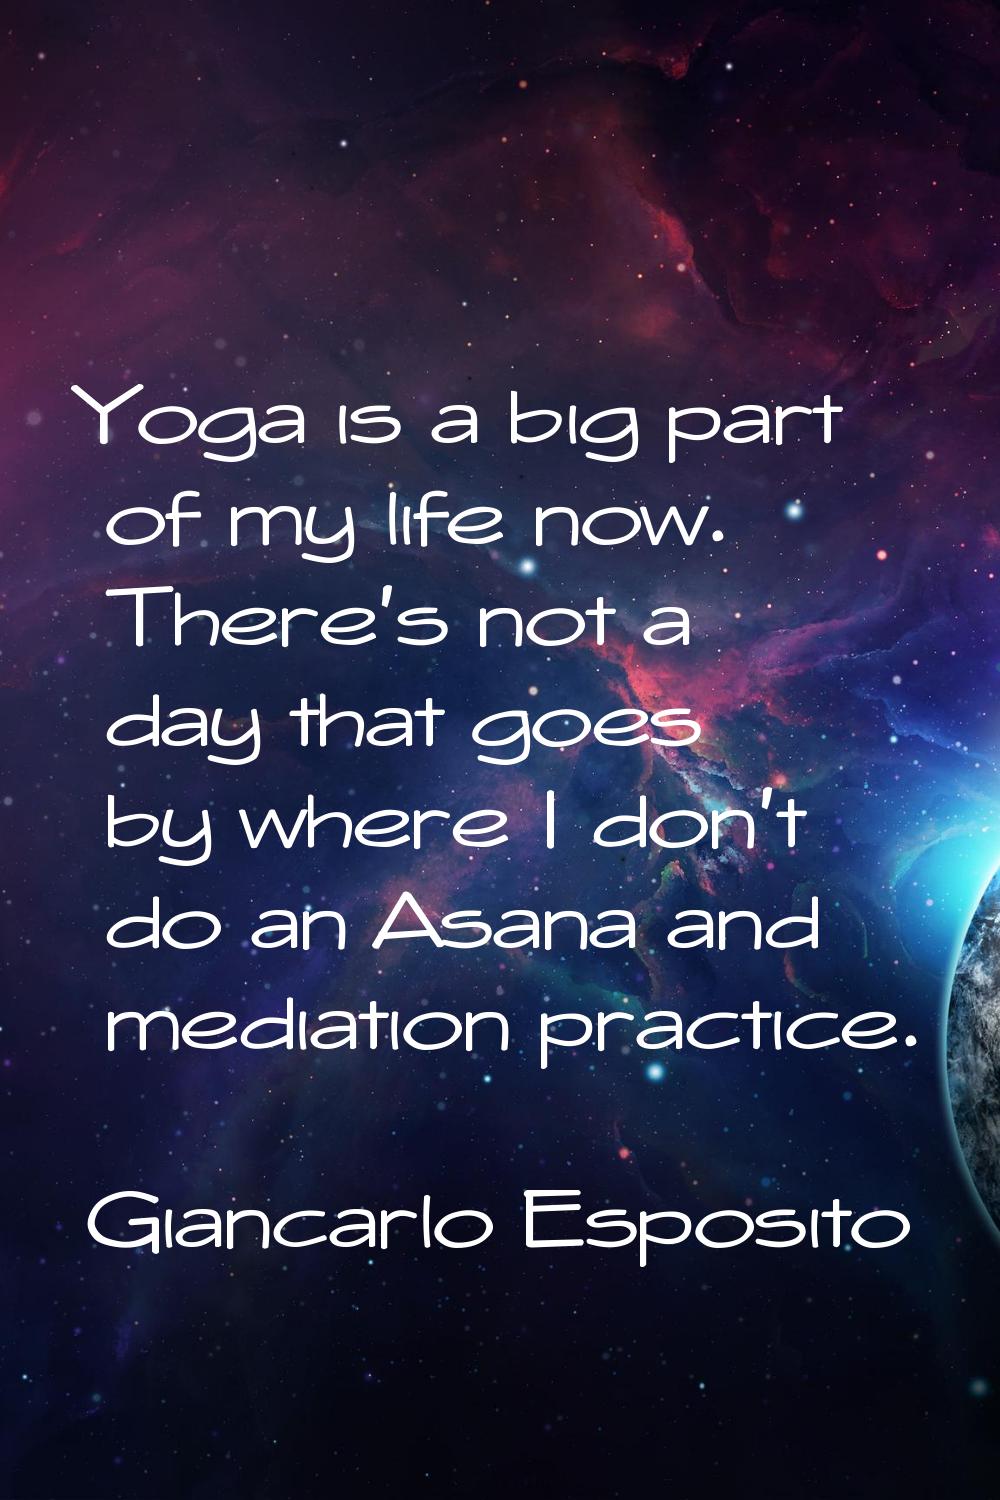 Yoga is a big part of my life now. There's not a day that goes by where I don't do an Asana and med